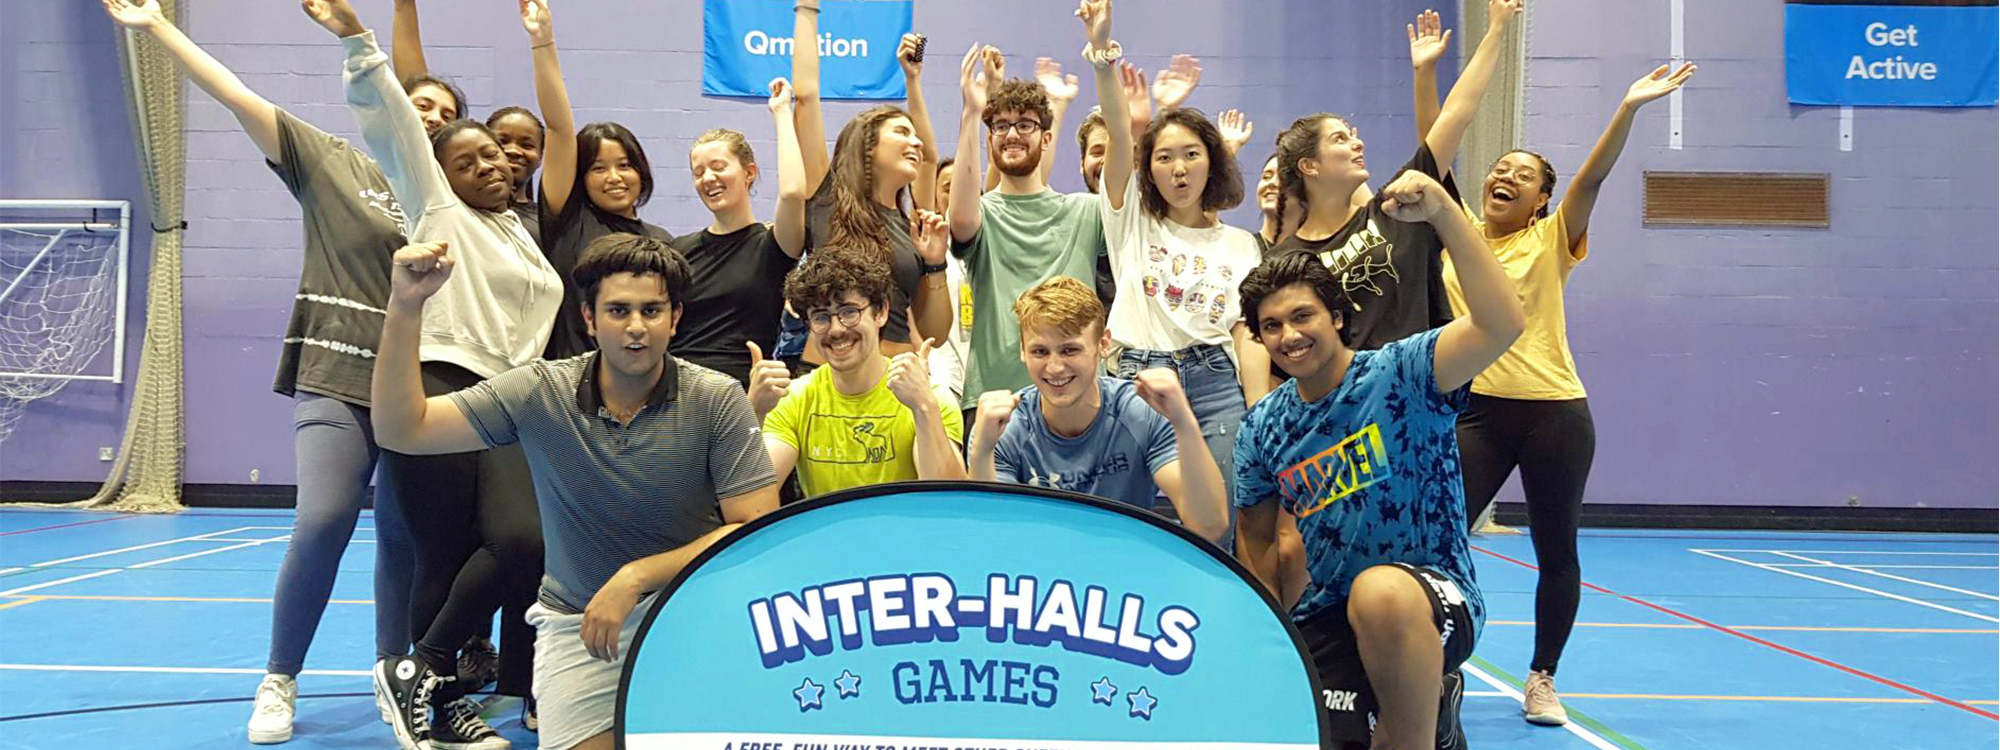 Inter-Halls Games, is a chance for you to participate in different activities throughout the year ranging from a Park Run to a Tug-of-war.